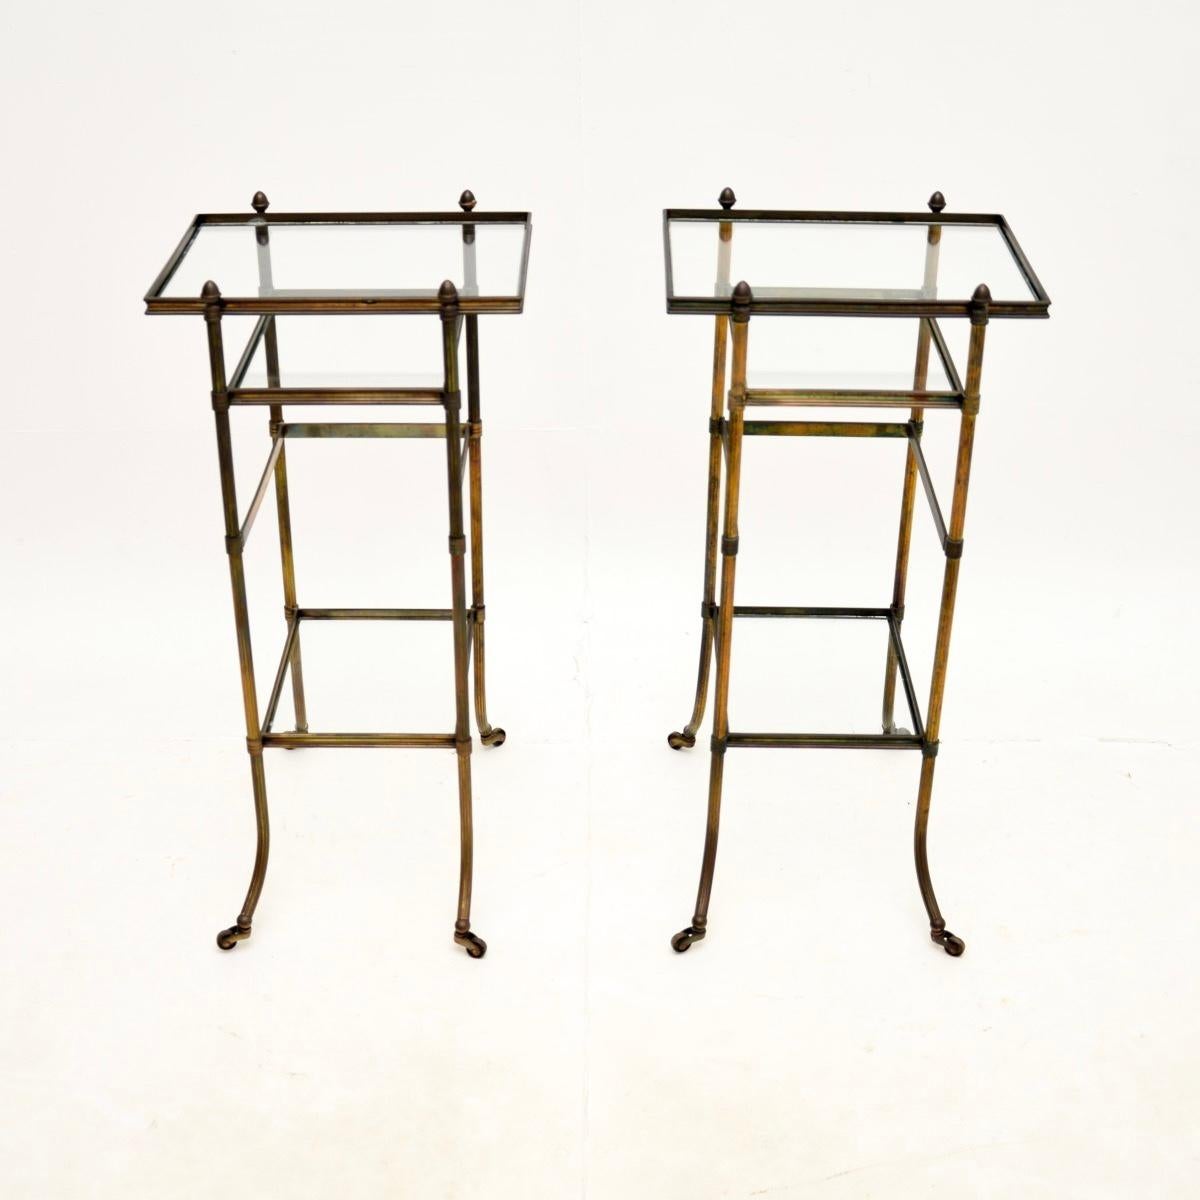 A beautiful pair of vintage French brass side tables, dating from around the 1960’s.

They are of superb quality and have an interesting design. They are nice and slim, perfect for use as side tables in a lounge or even as bedside tables. They have